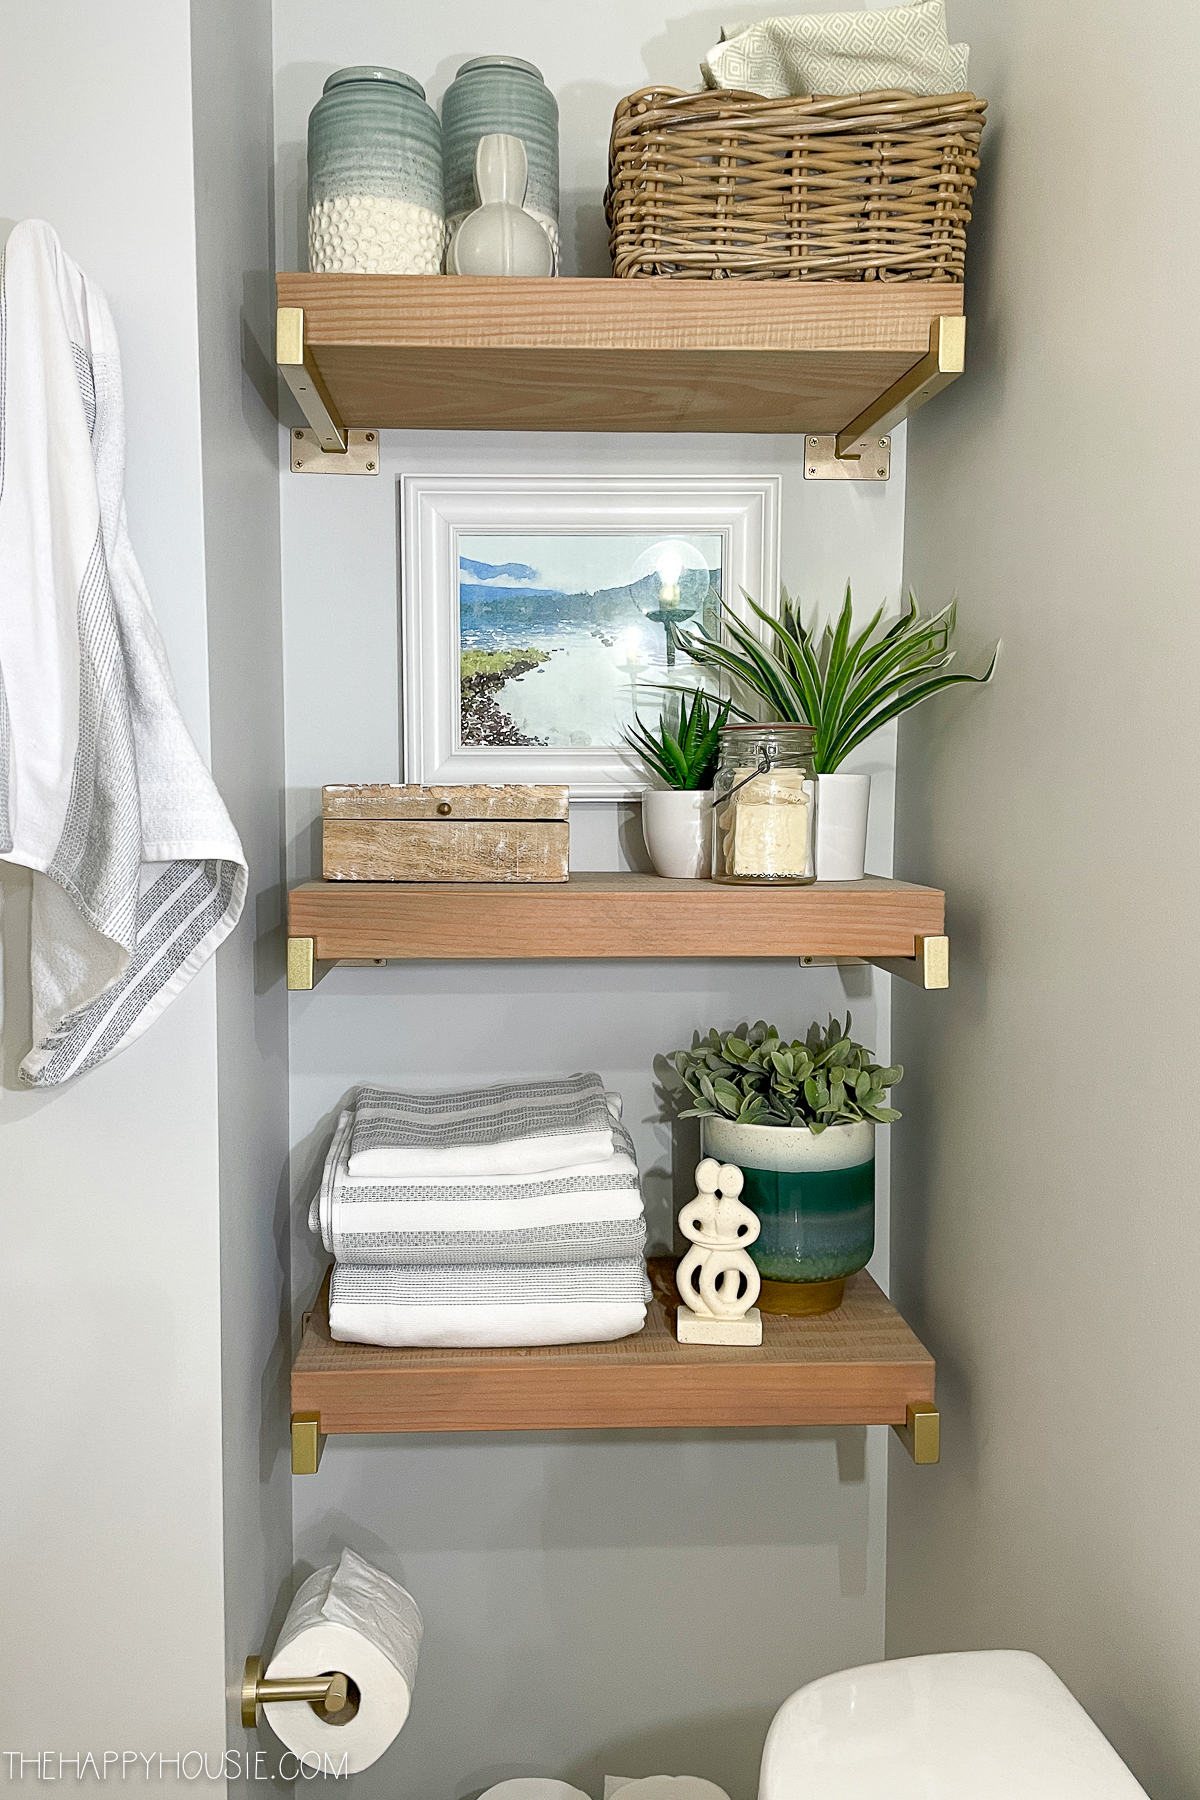 https://www.thehappyhousie.com/wp-content/uploads/2022/01/bathroom-cabinet-organization-ideas-and-how-to-organize-your-bathroom-10.jpg